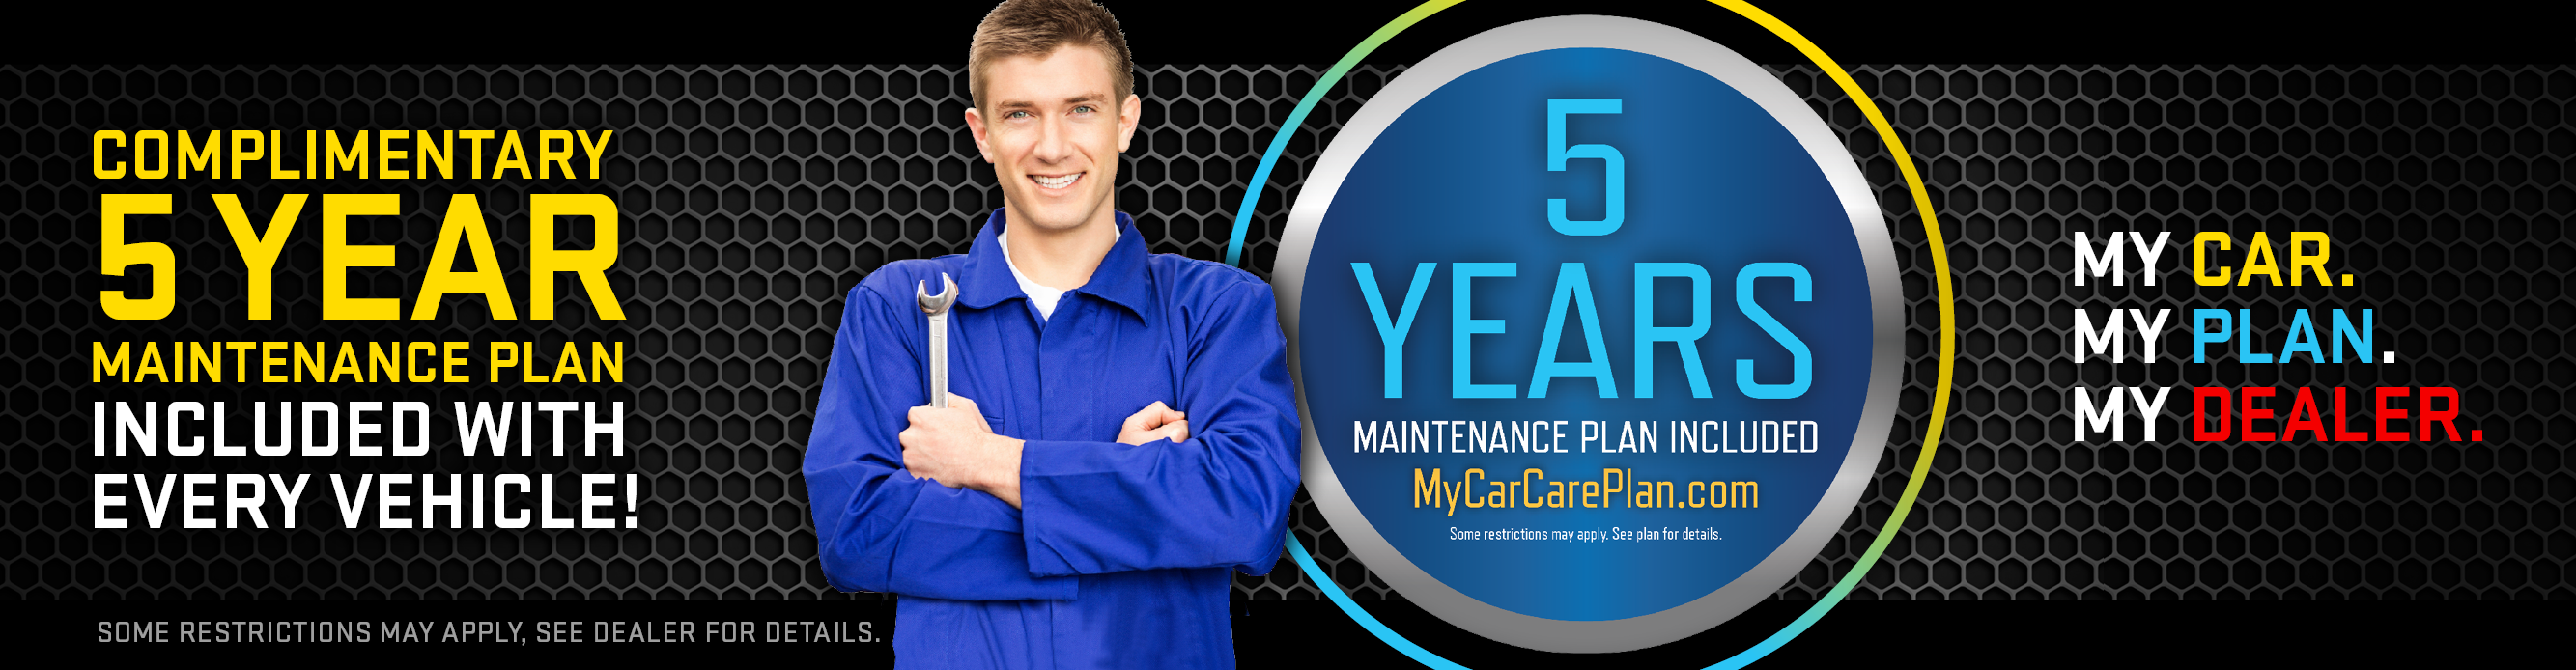 5 Year Maintenance Plan offered on all vehicles